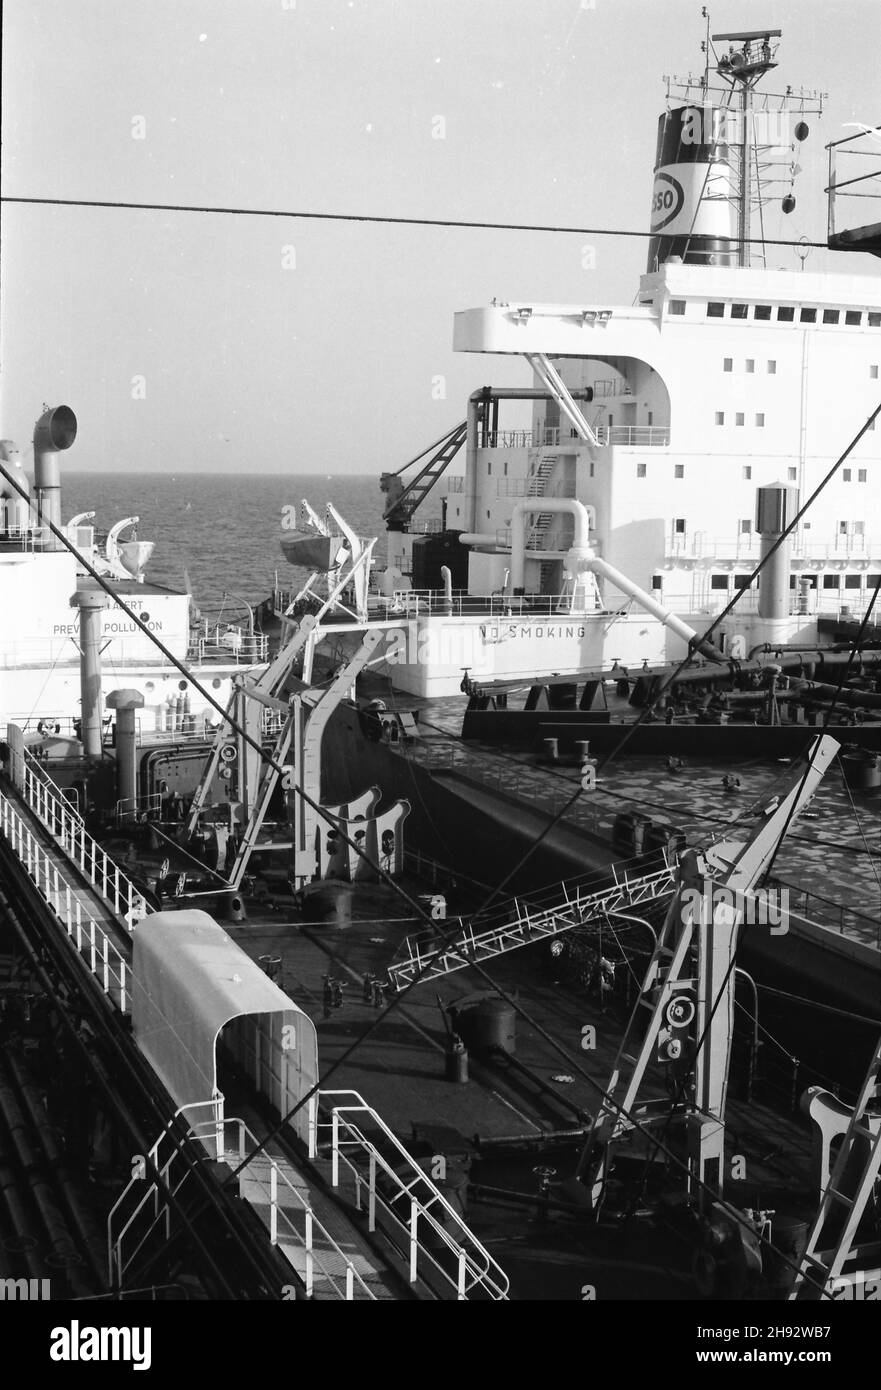 SS Esso York (left) lightening supertanker in Lyme Bay, southern England. An operation to remove some of the larger ship's cargo so that it could access ports where it couldn't go fully loaded. Photo taken 1975/76 Stock Photo